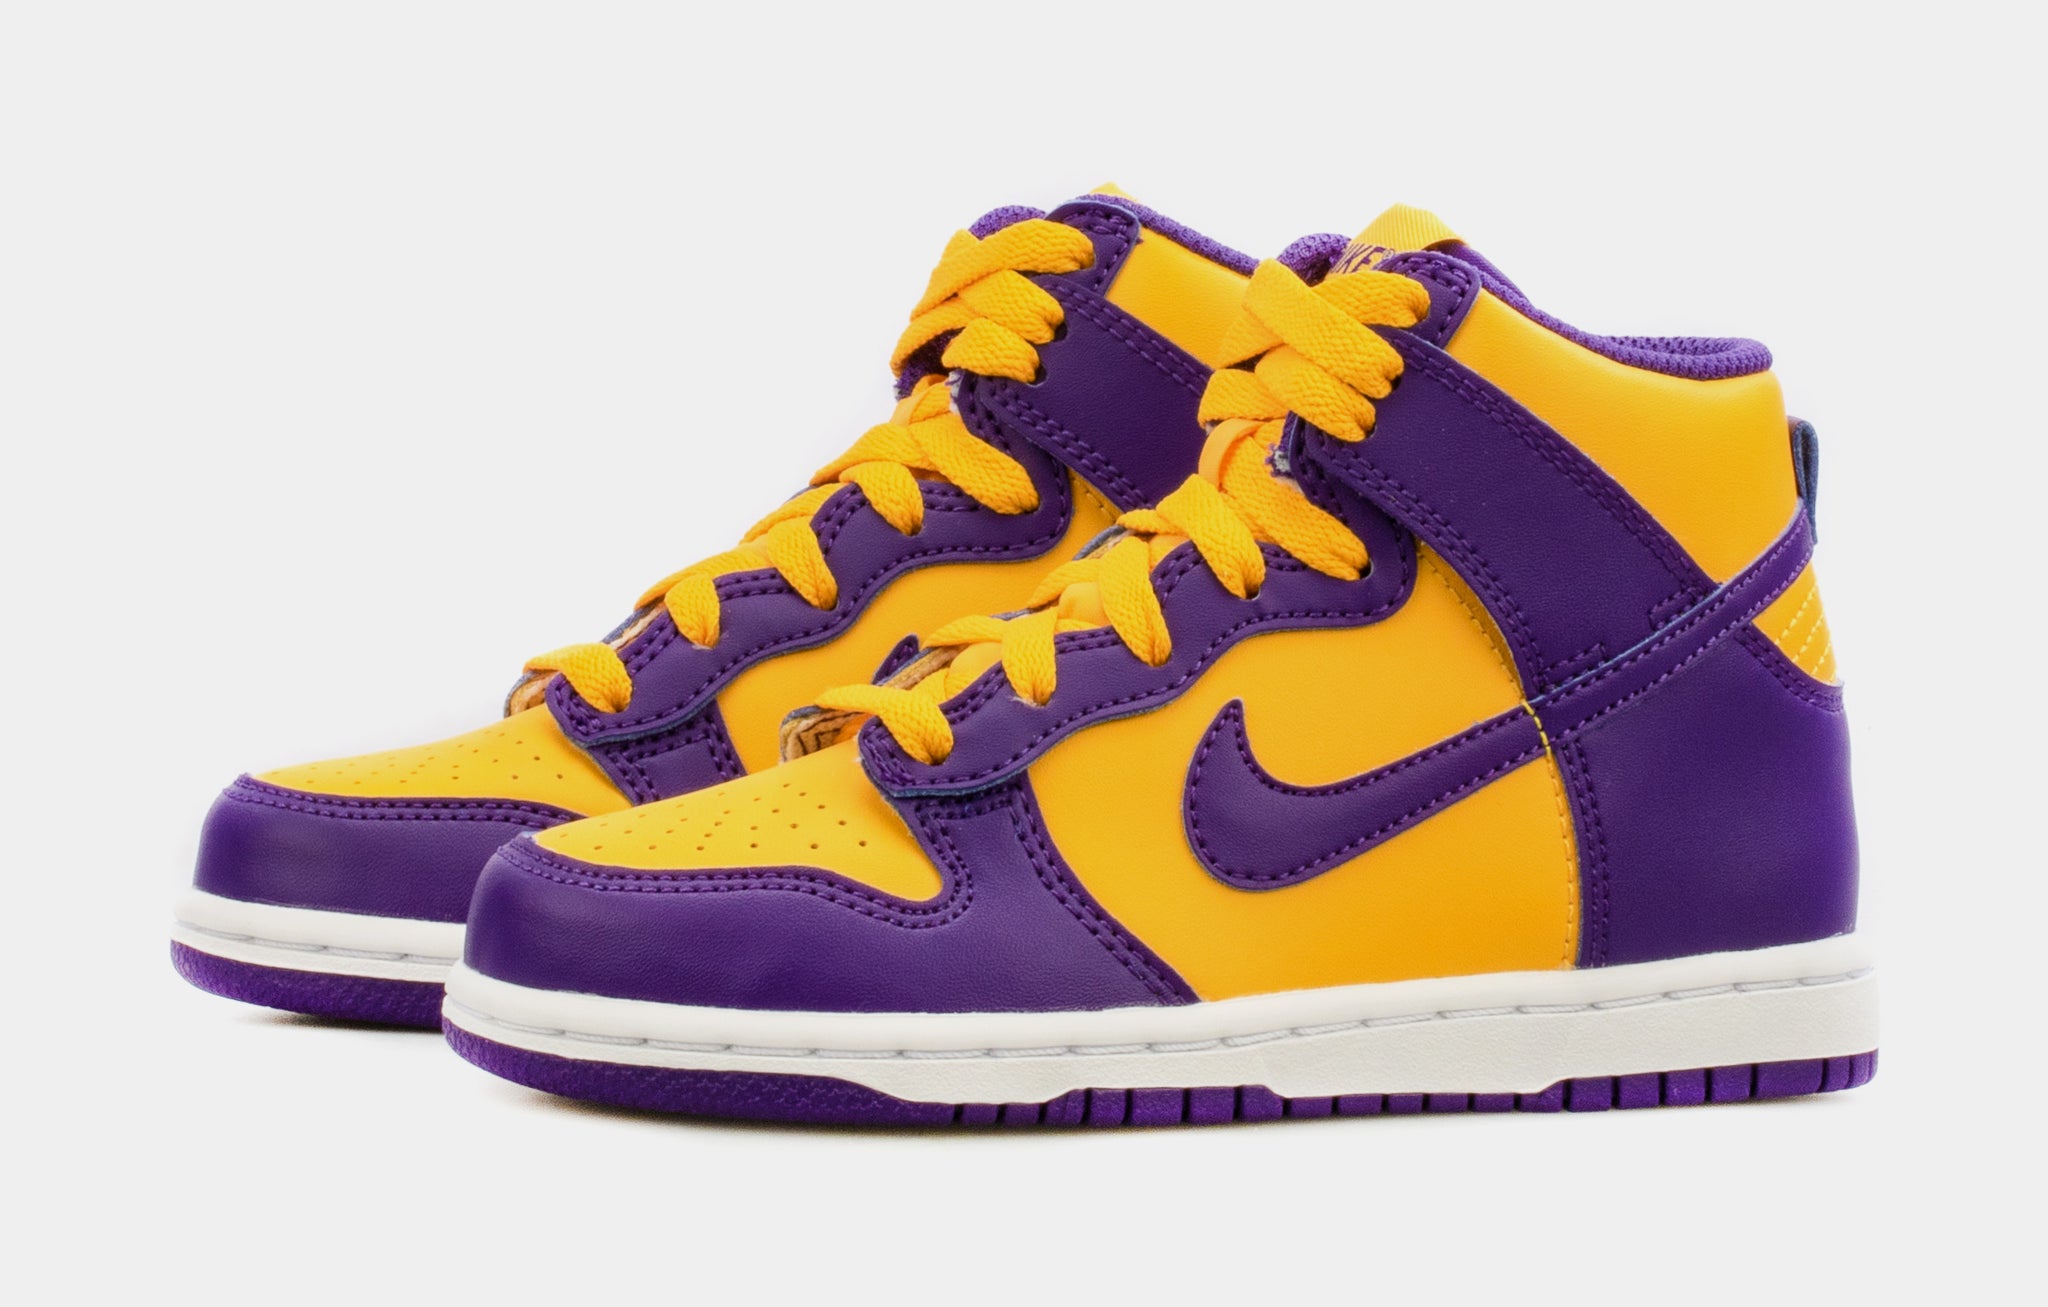 lakers shoes nike